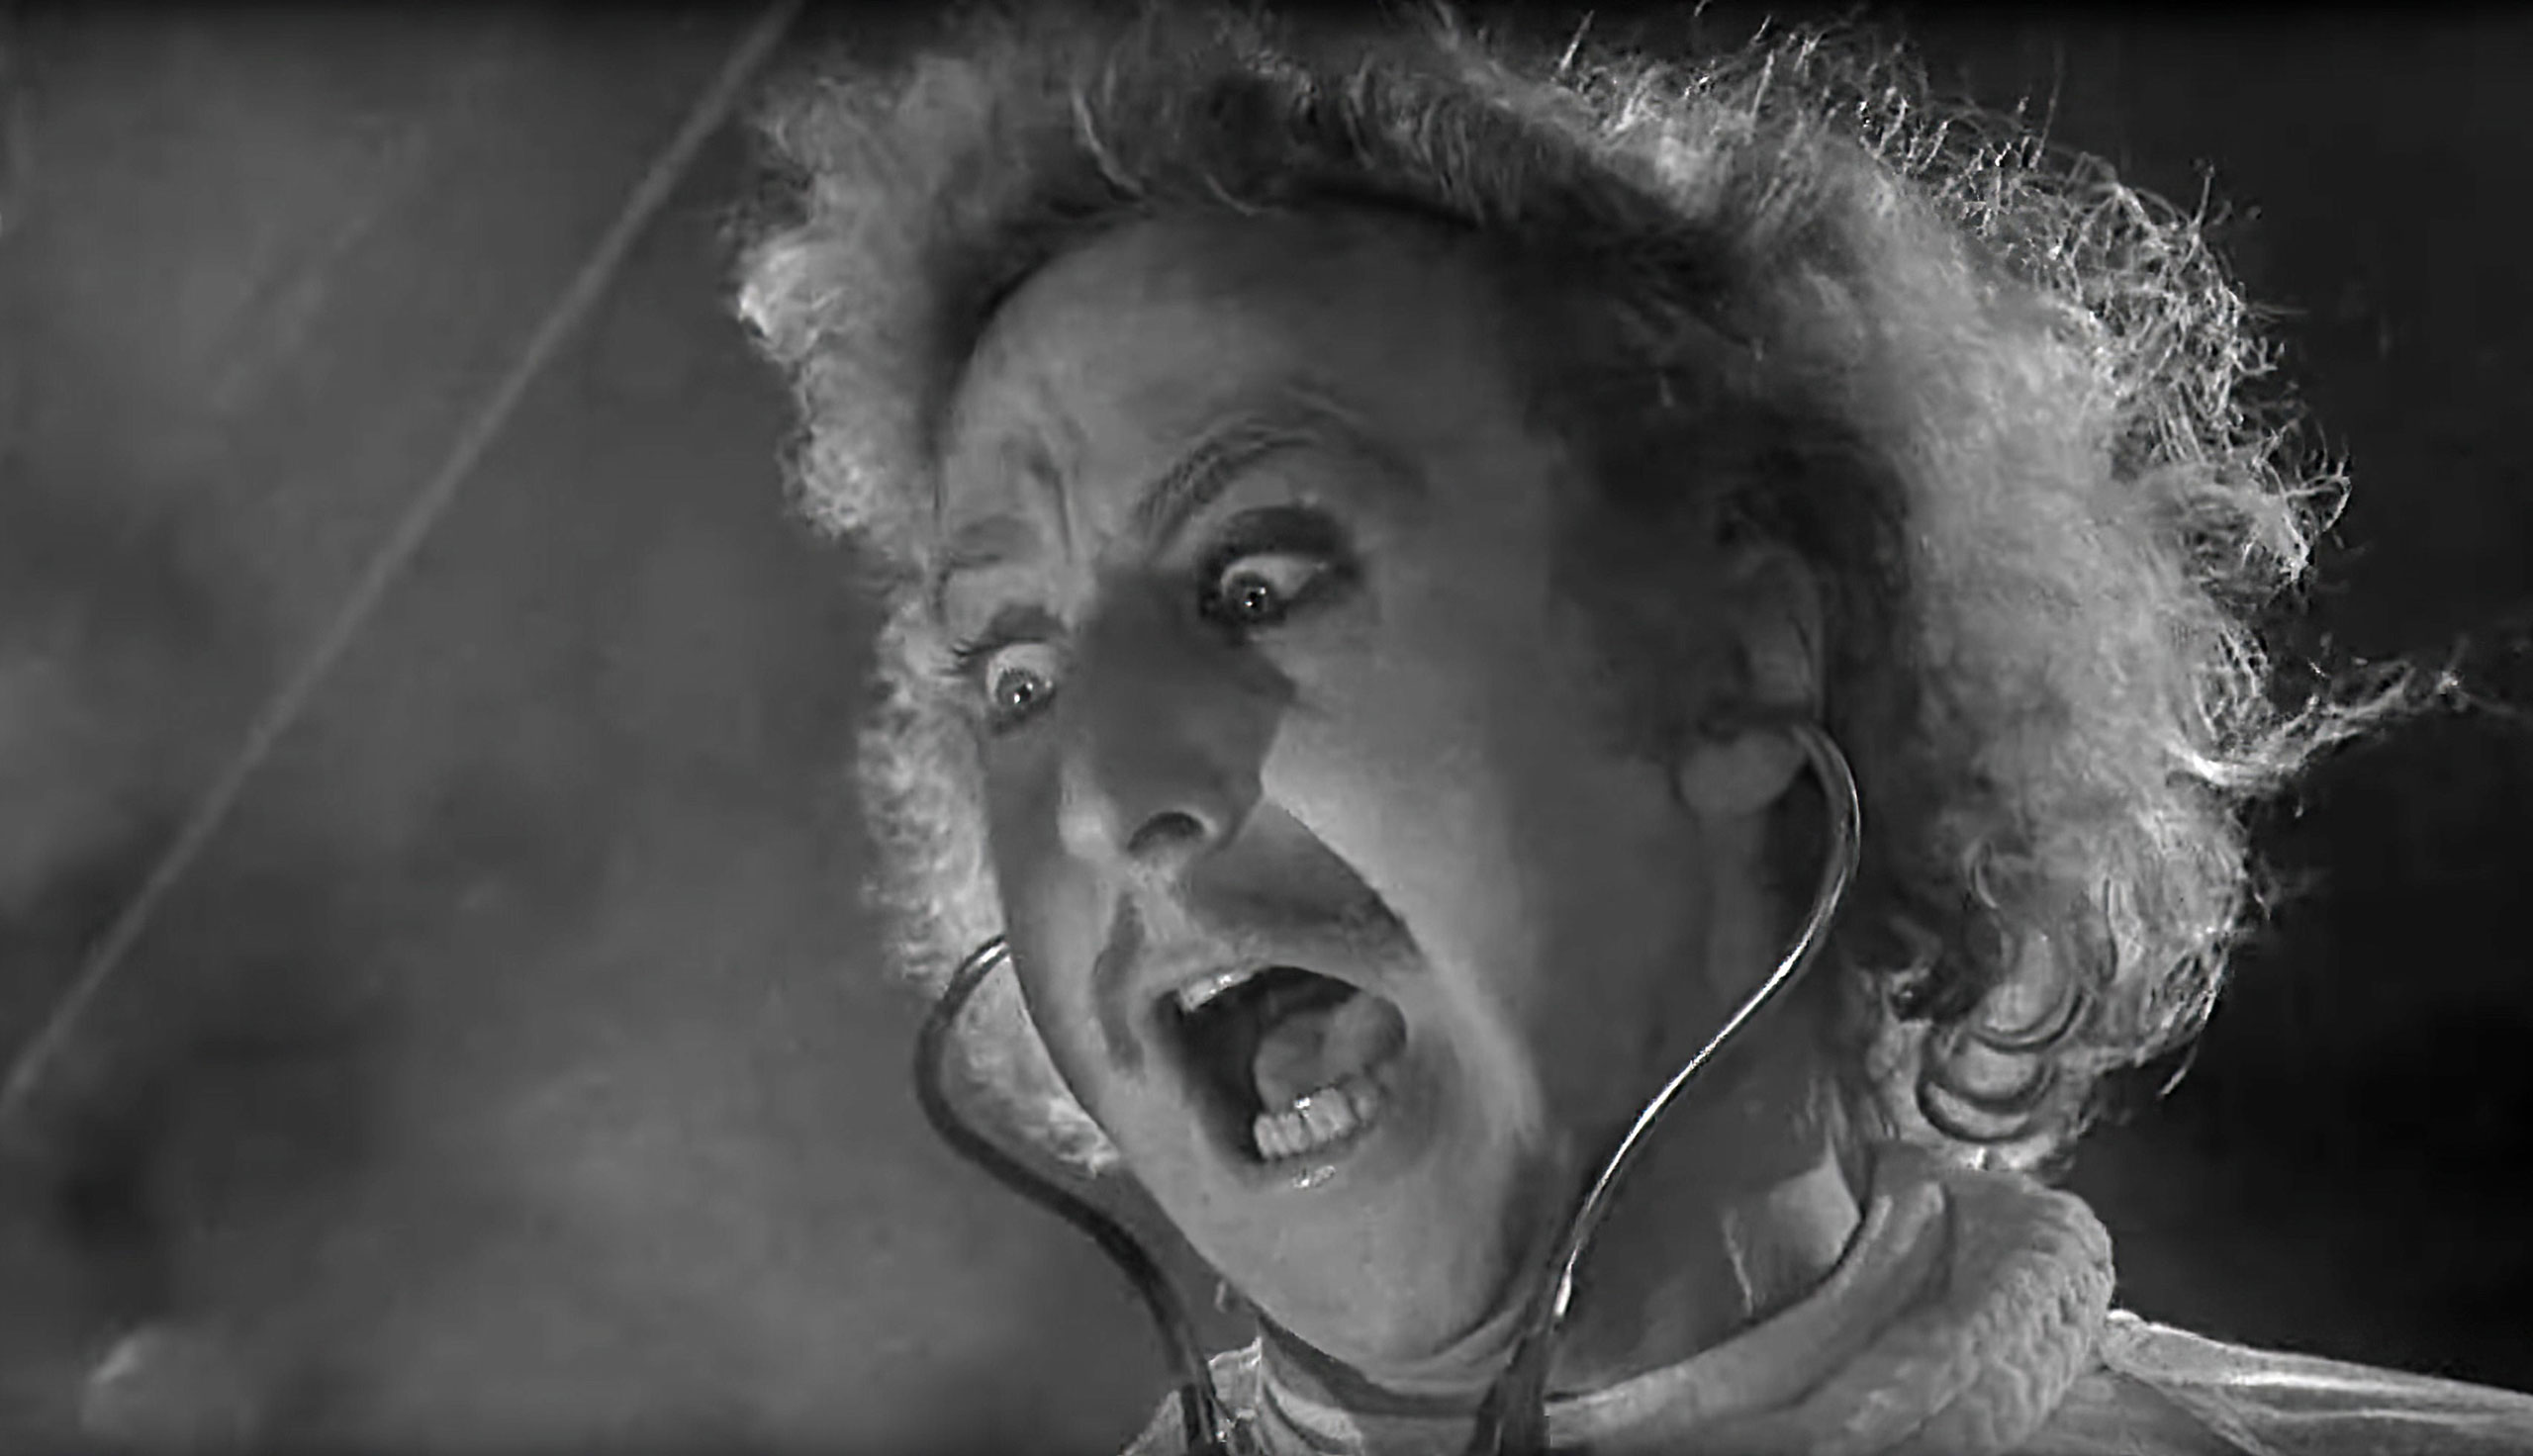 Young Frankenstein, film by Brooks [1974]